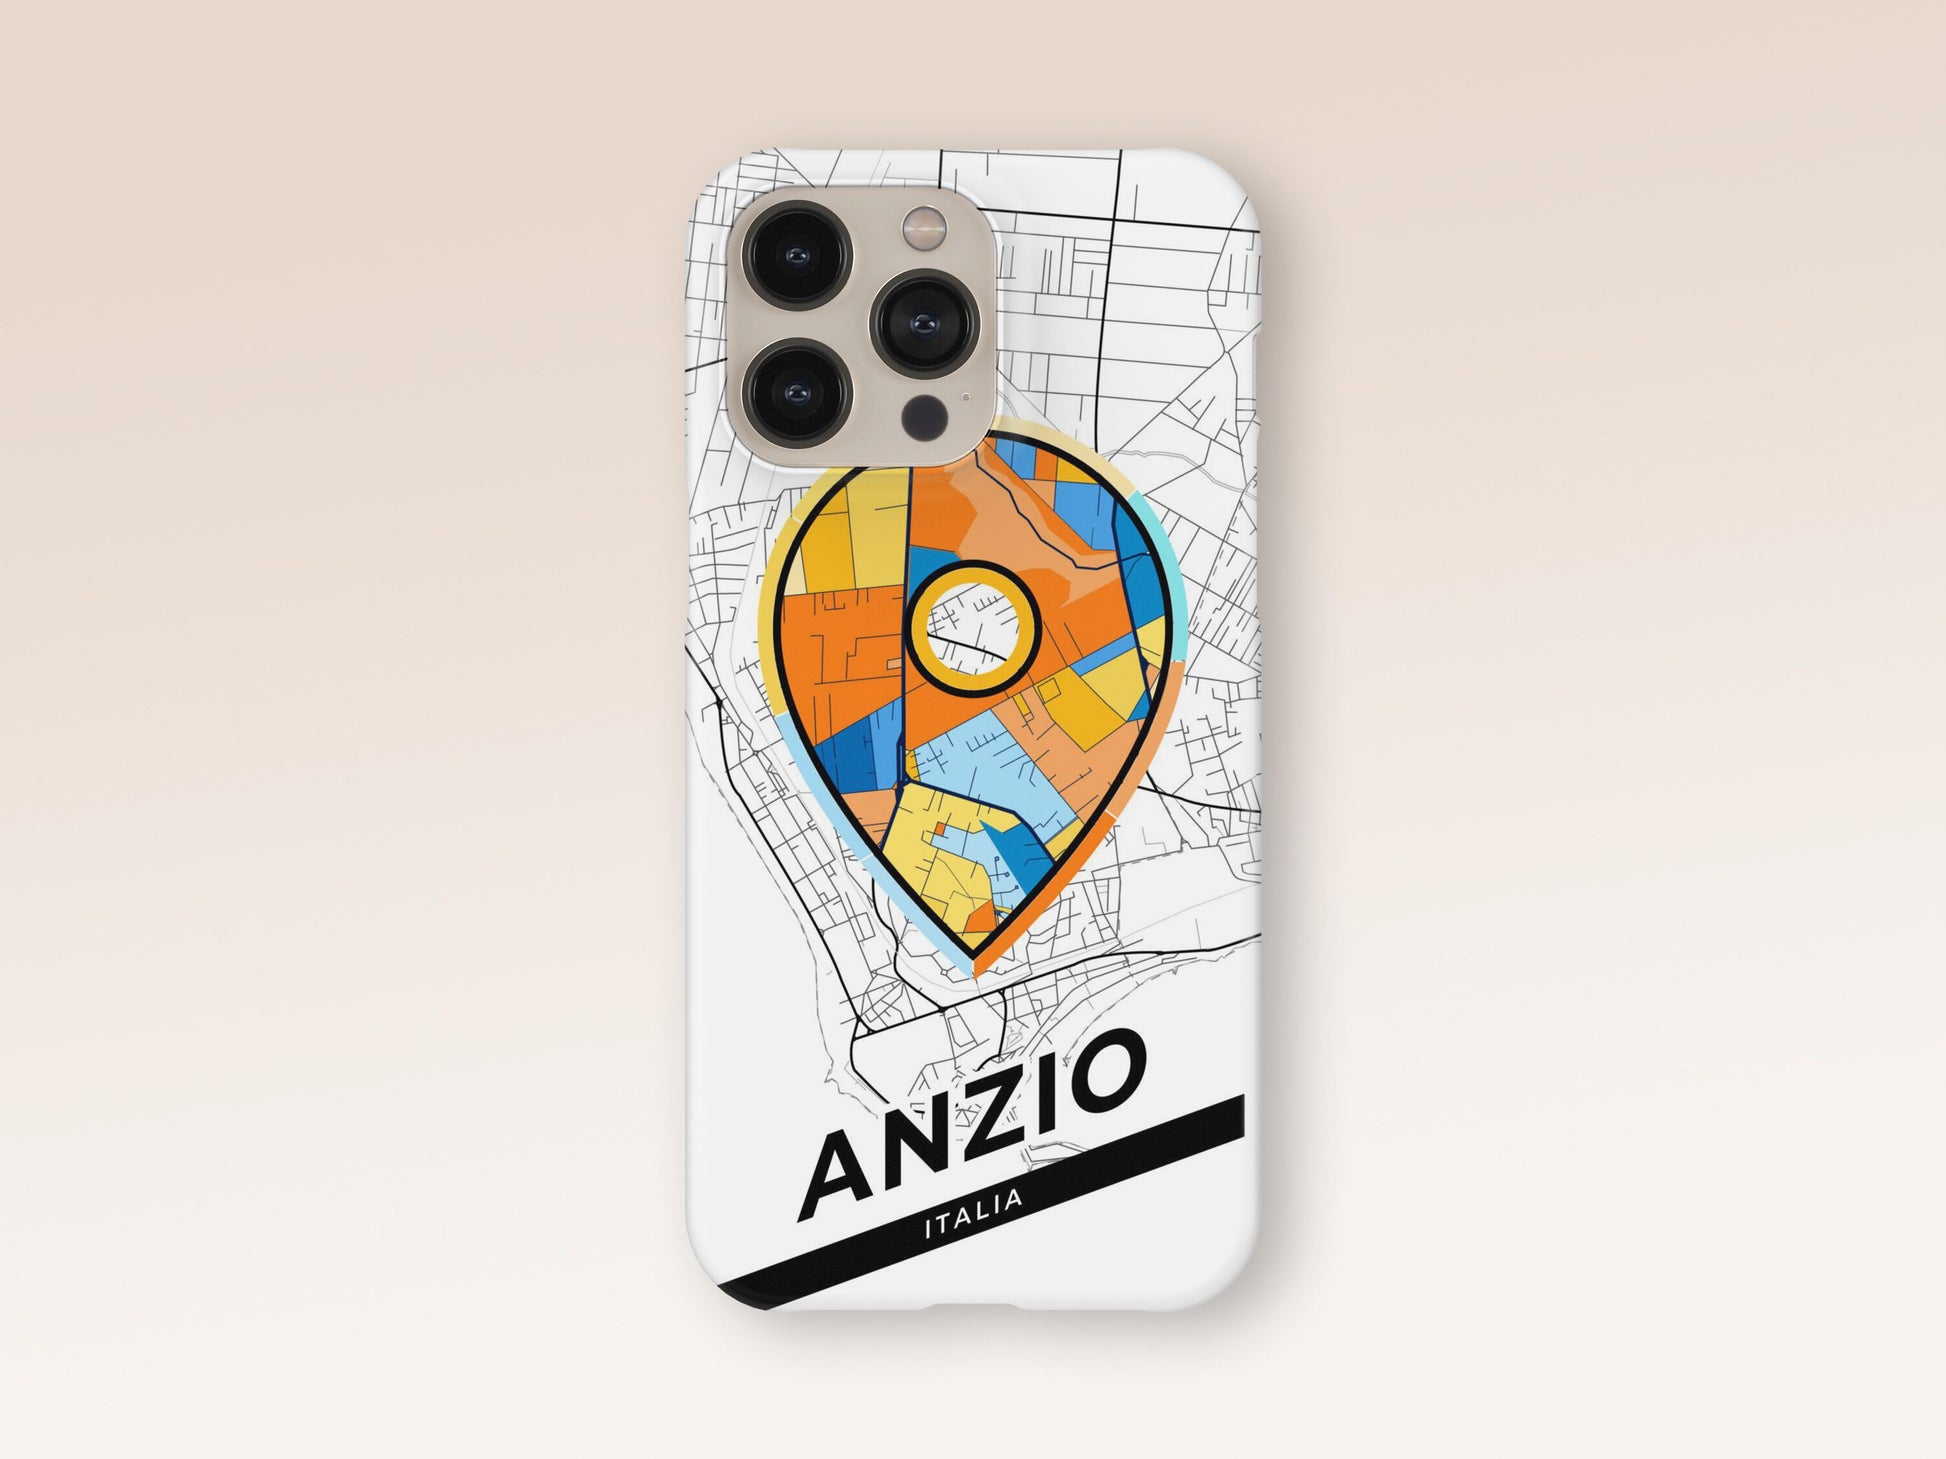 Anzio Italy slim phone case with colorful icon. Birthday, wedding or housewarming gift. Couple match cases. 1